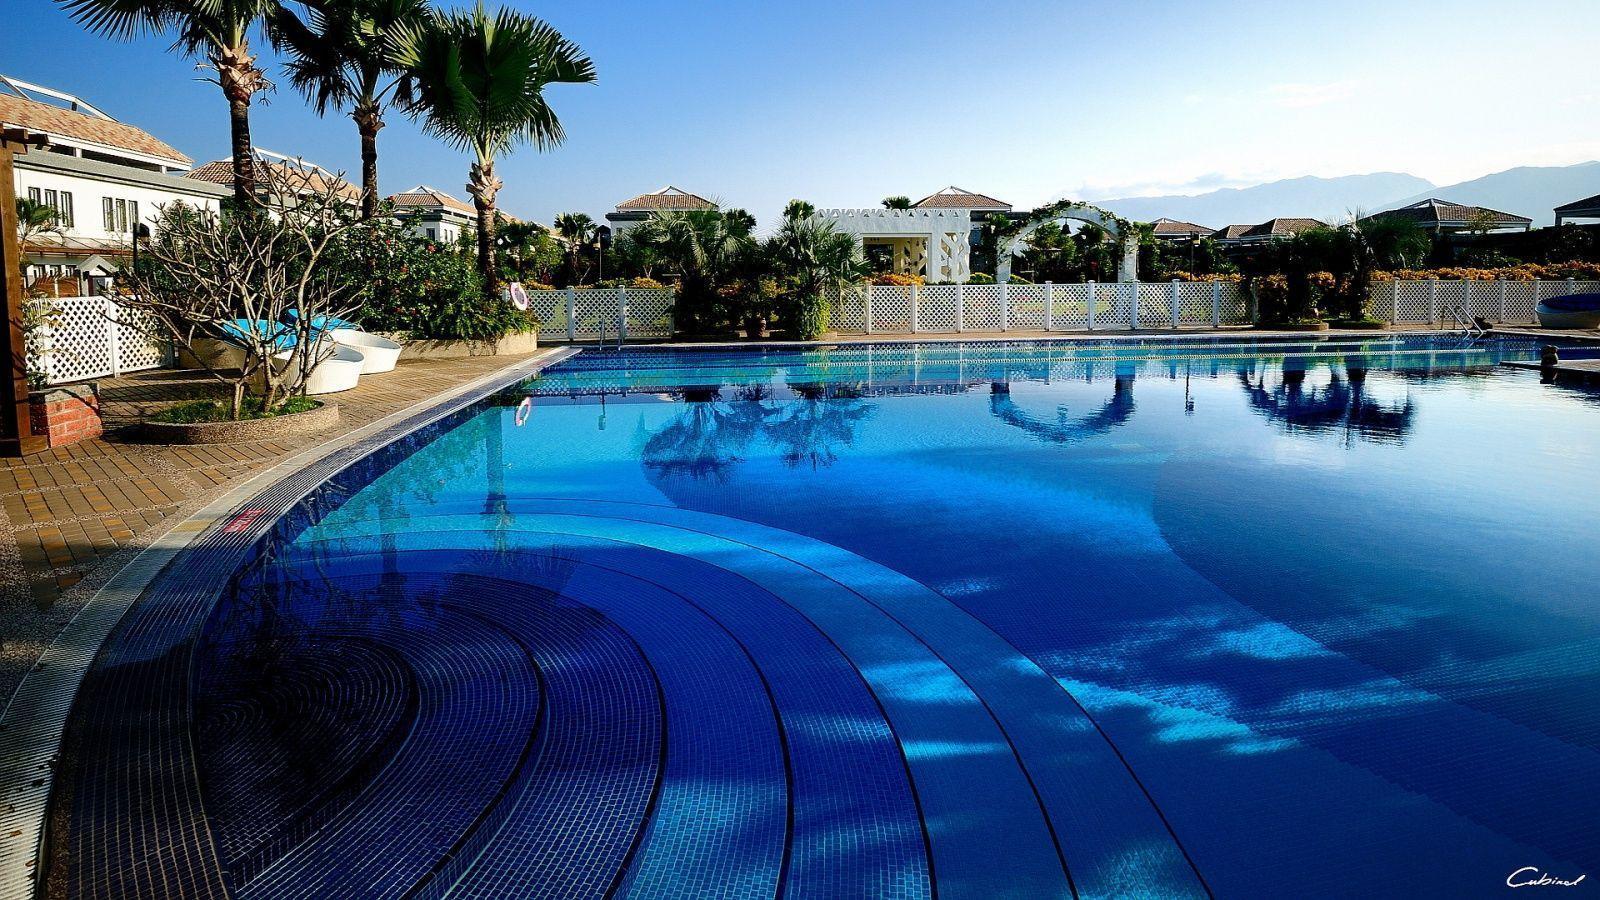 Best swimming pools in the world: Top 10 to train in